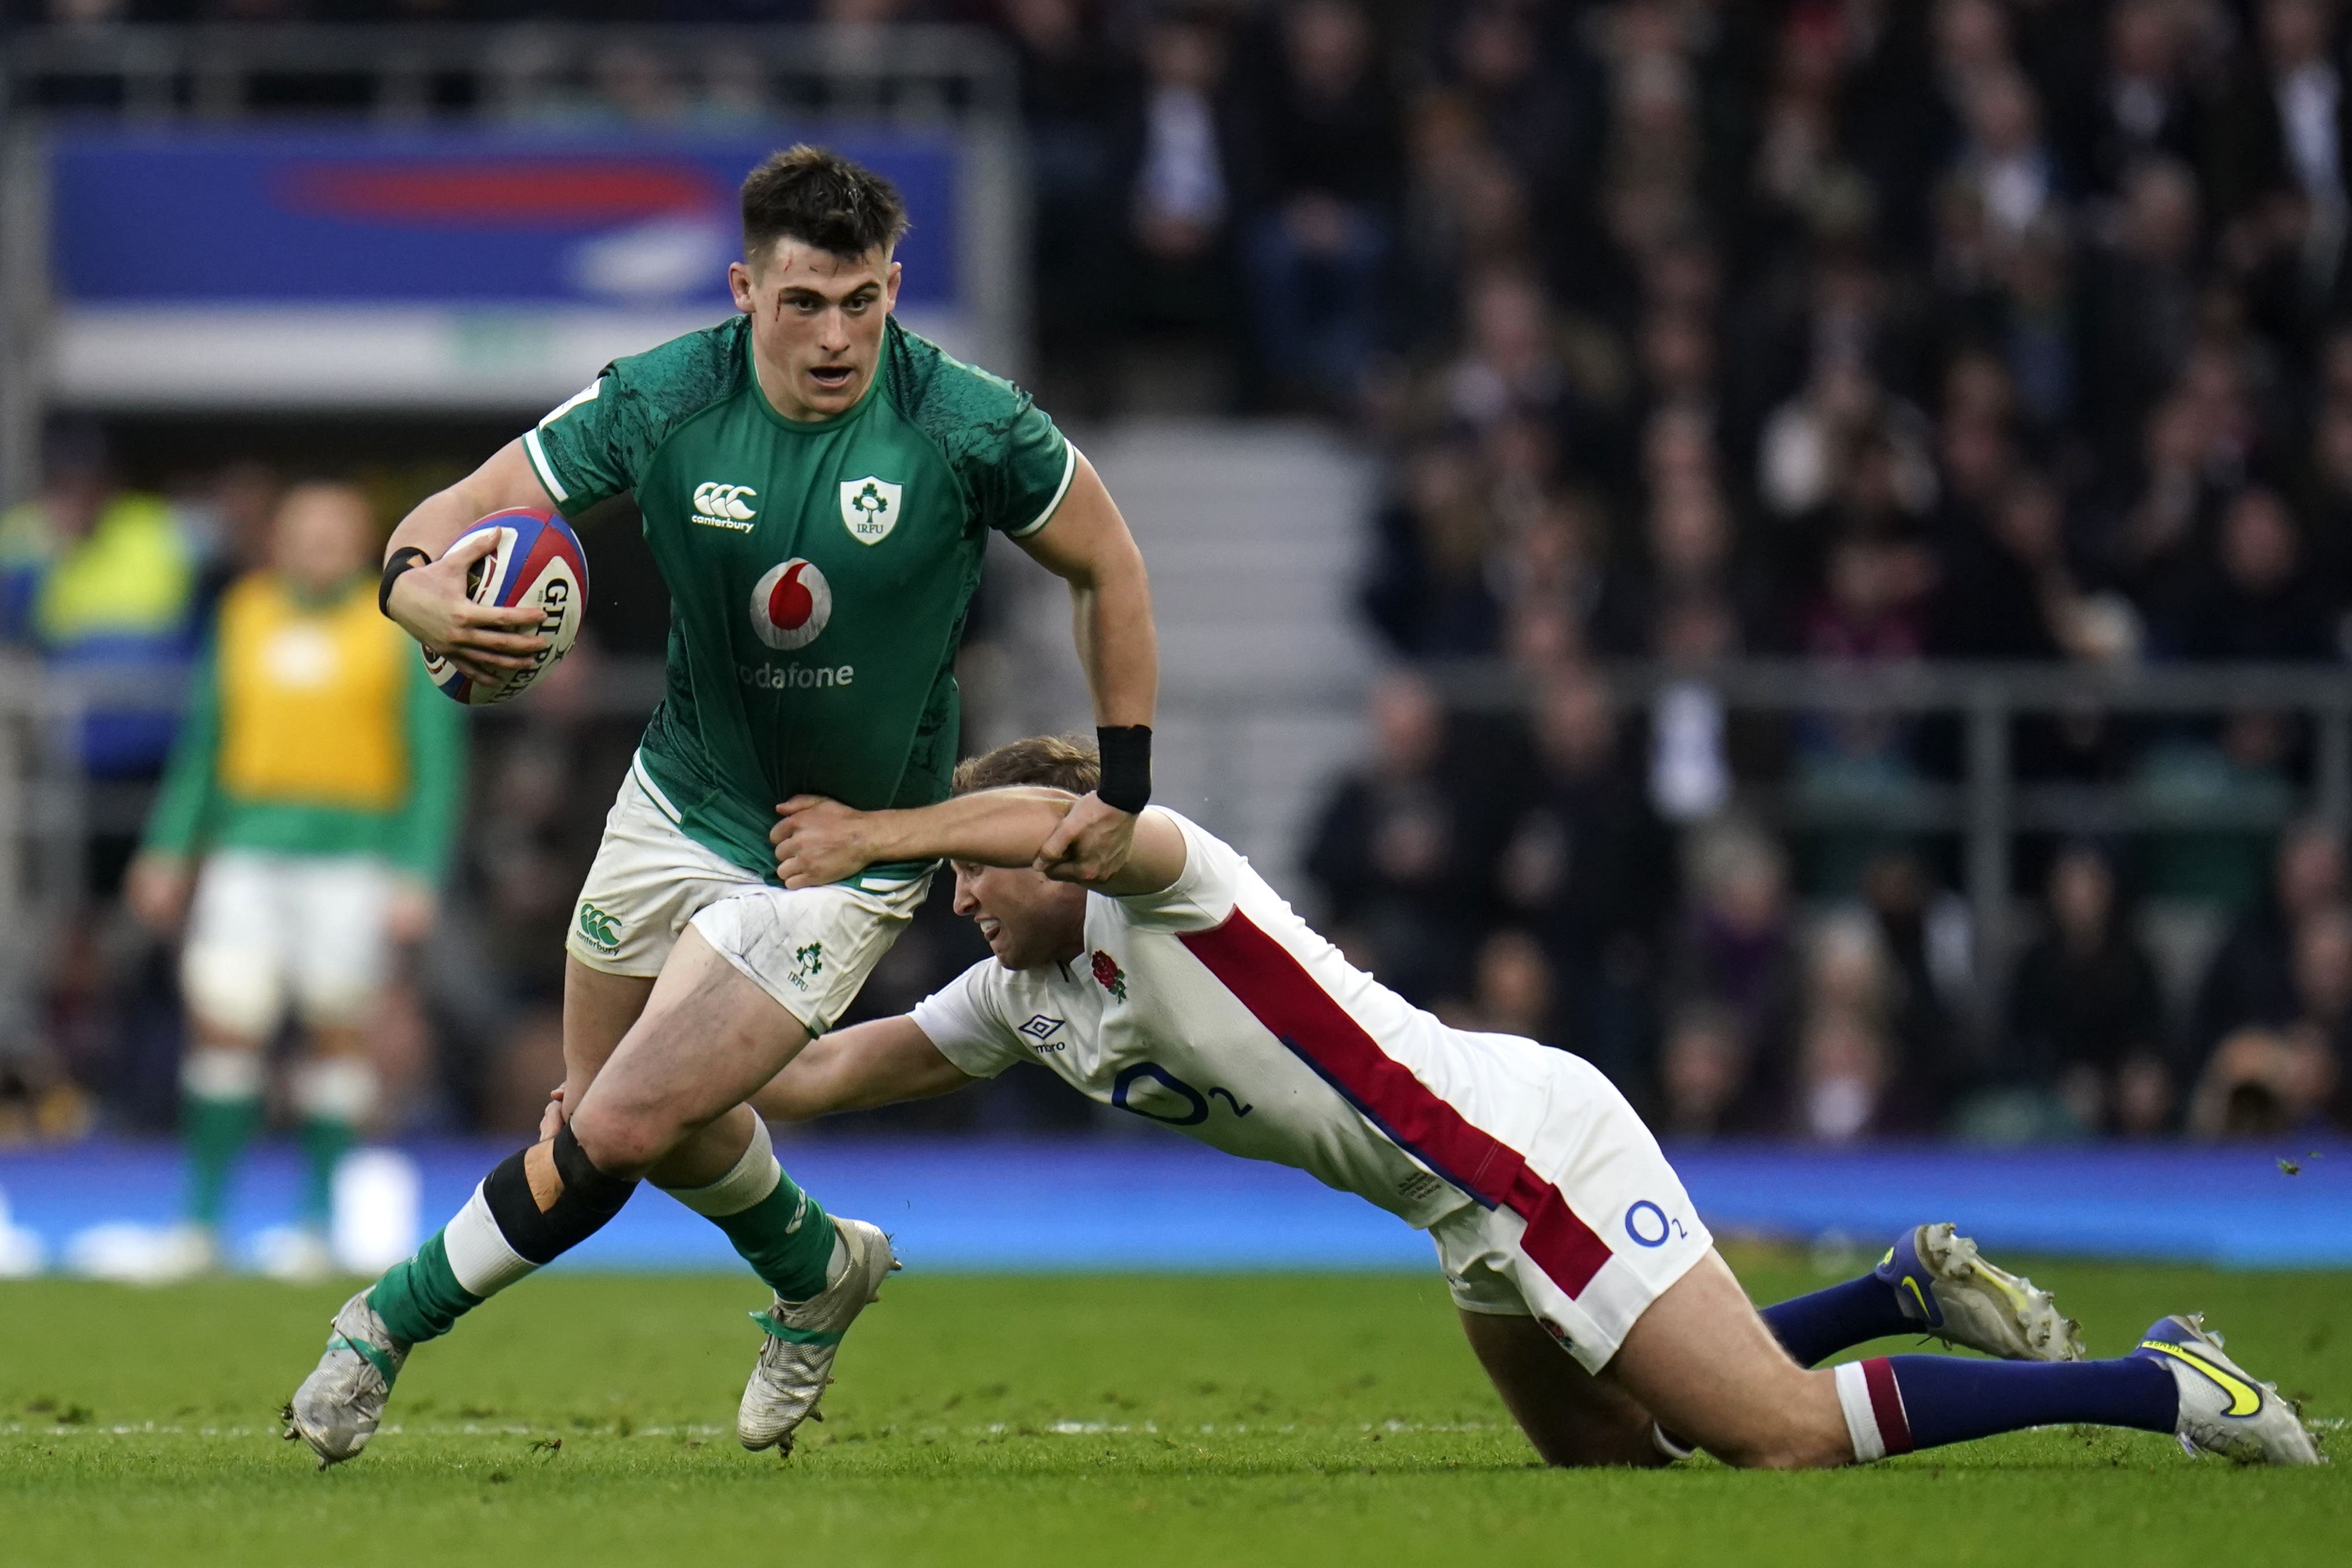 Dan Sheehan’s injured hamstring has ruled him out of the mouth-watering Ireland vs France clash